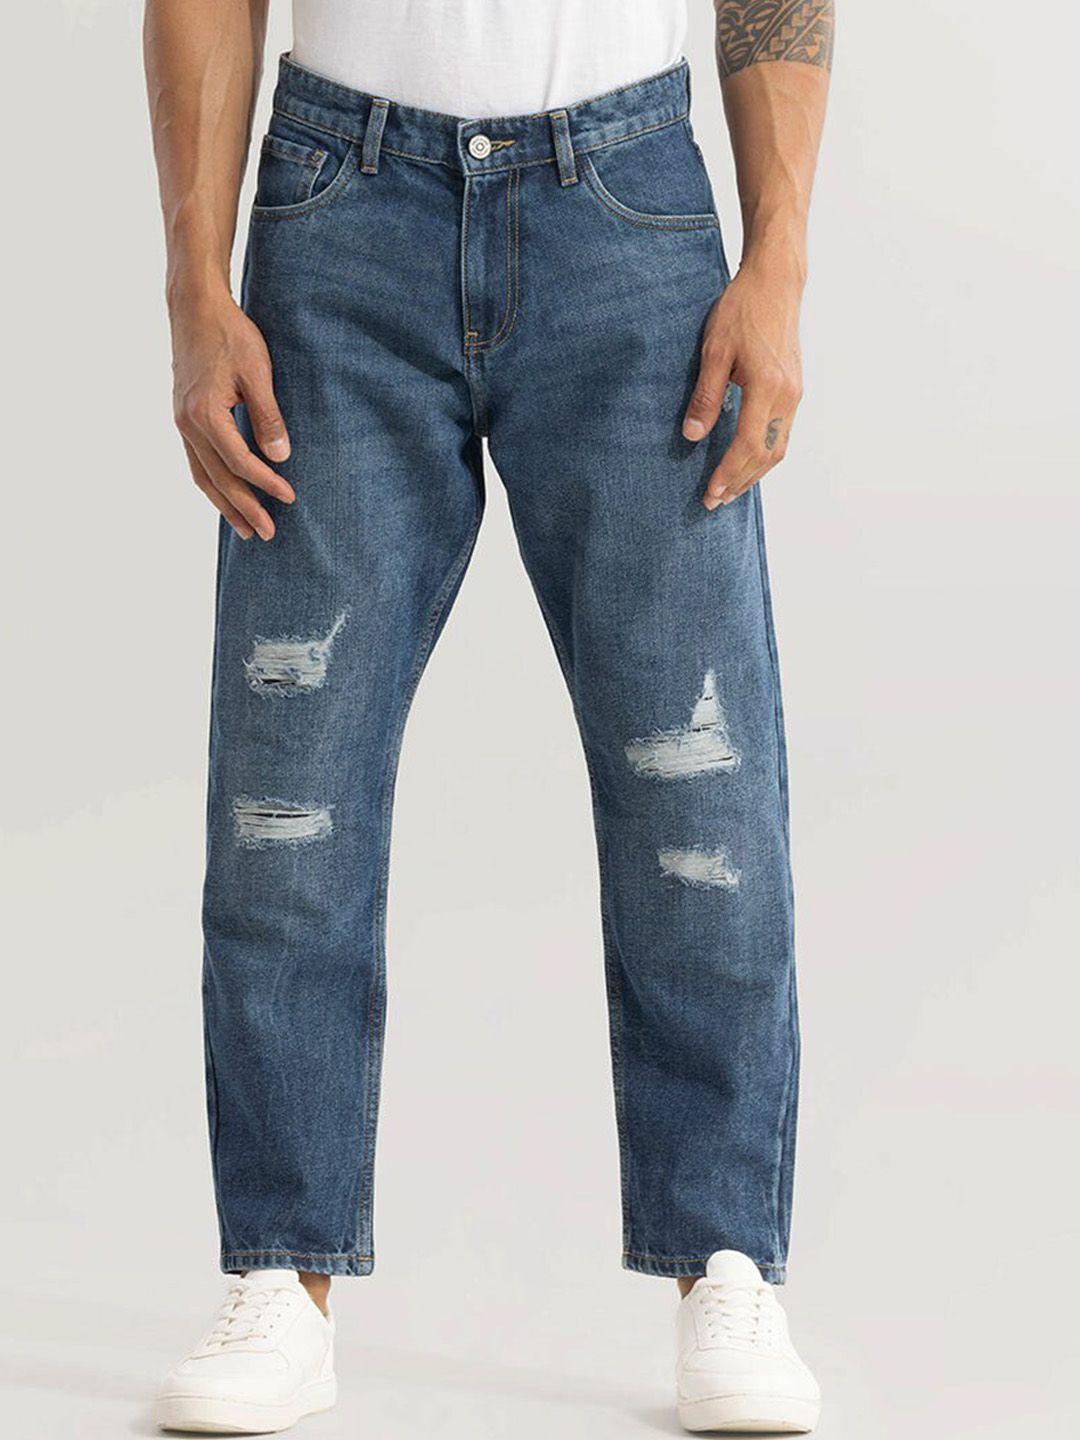 snitch-men-relaxed-fit-highly-distressed-heavy-fade-stretchable-jeans